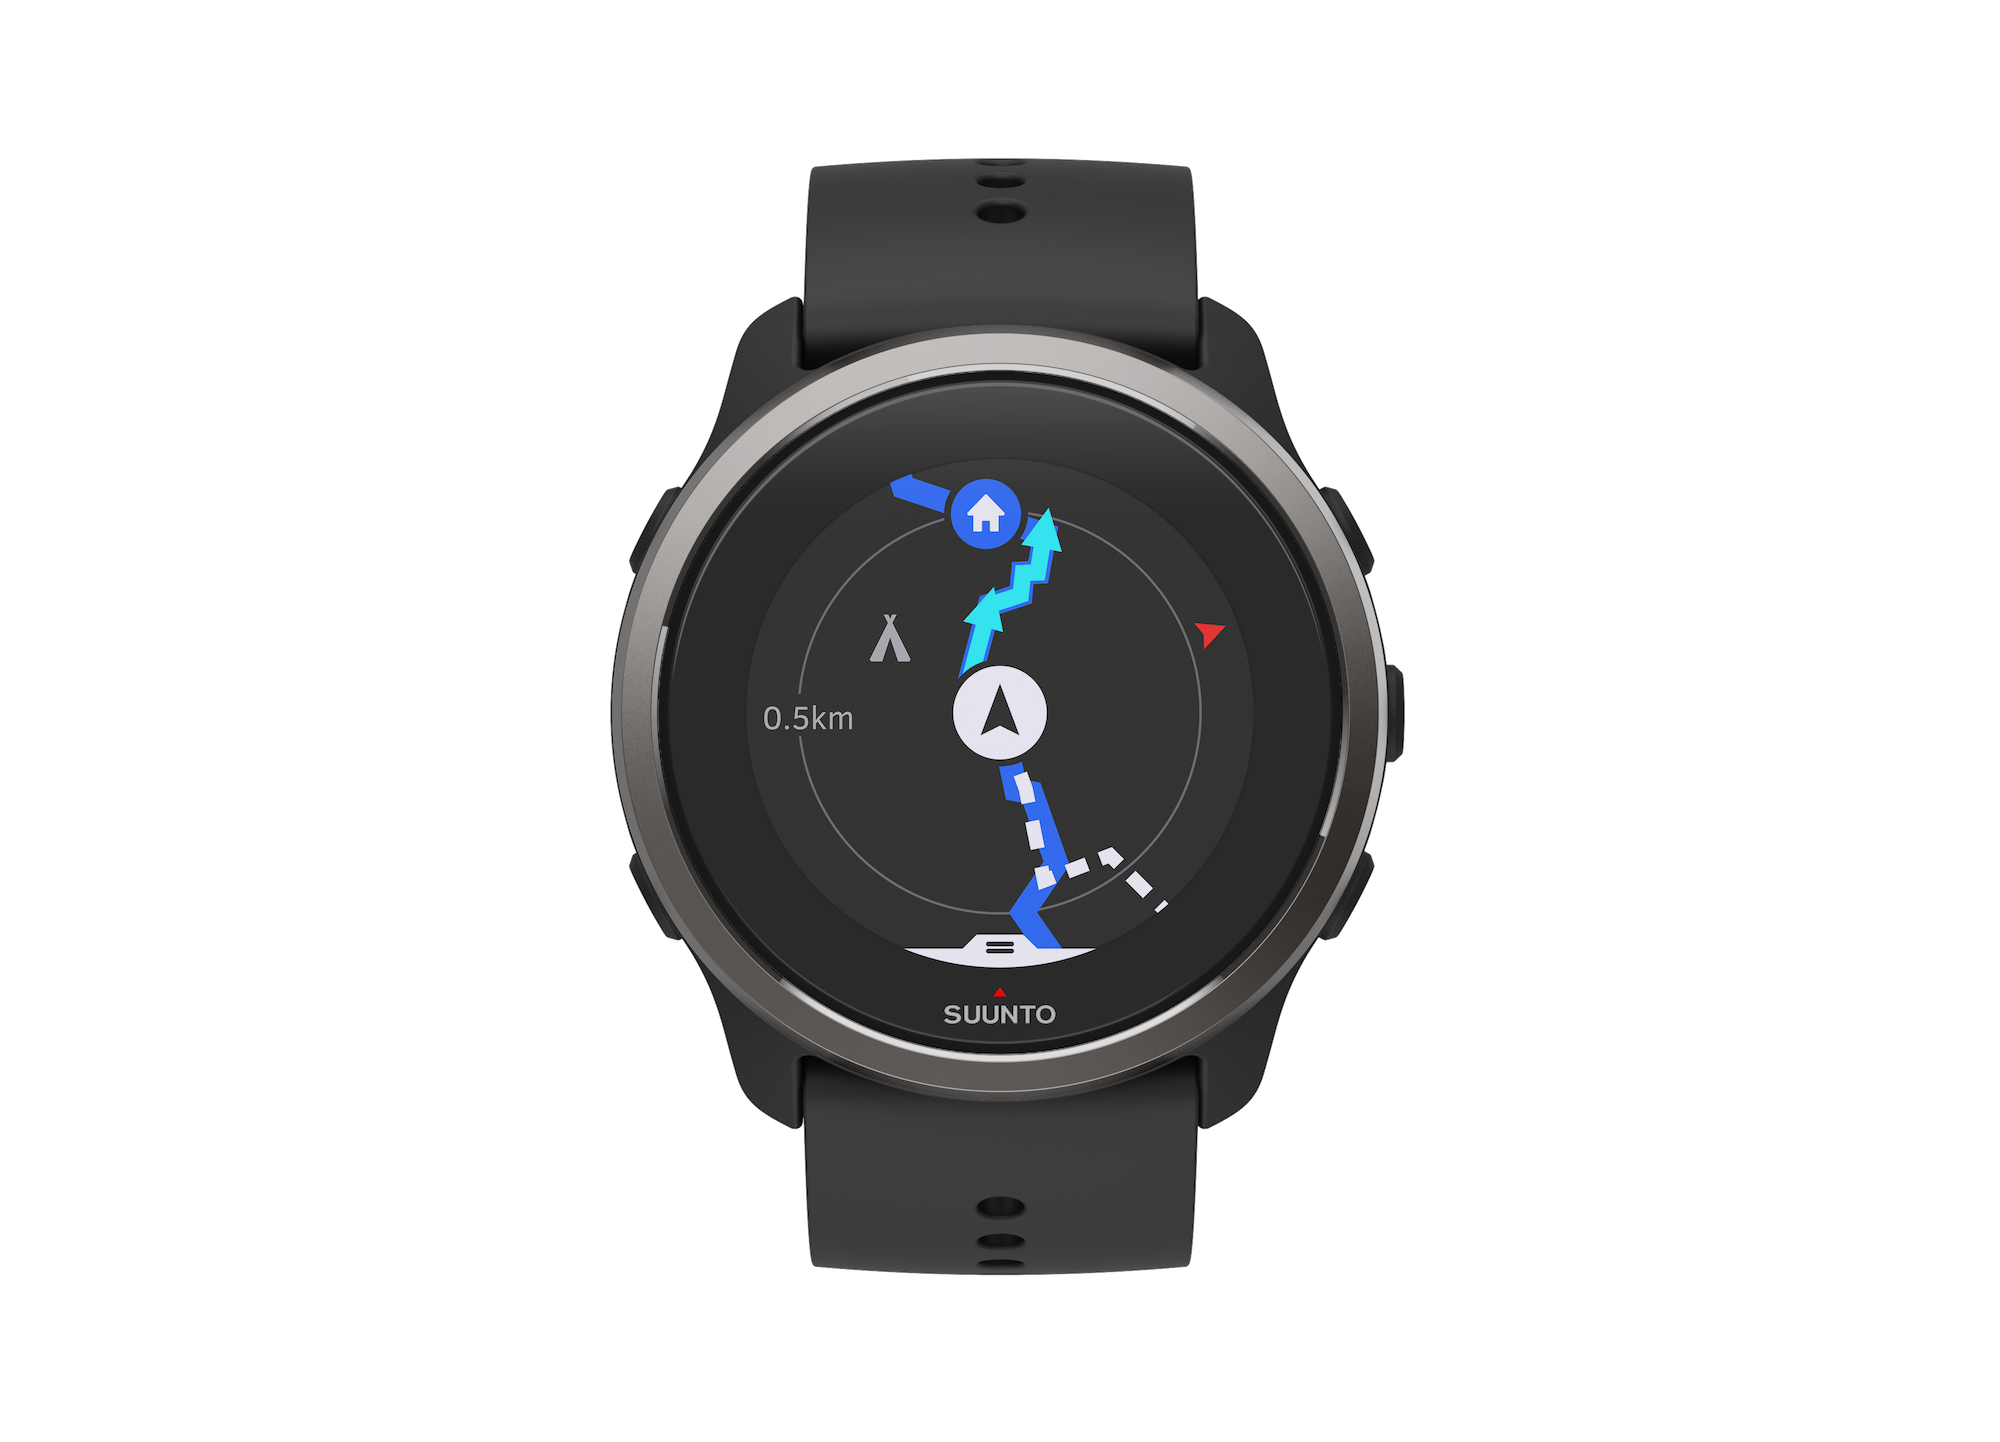 Introducing Suunto's Lightest GPS Watch with 100 Hours of Battery Life